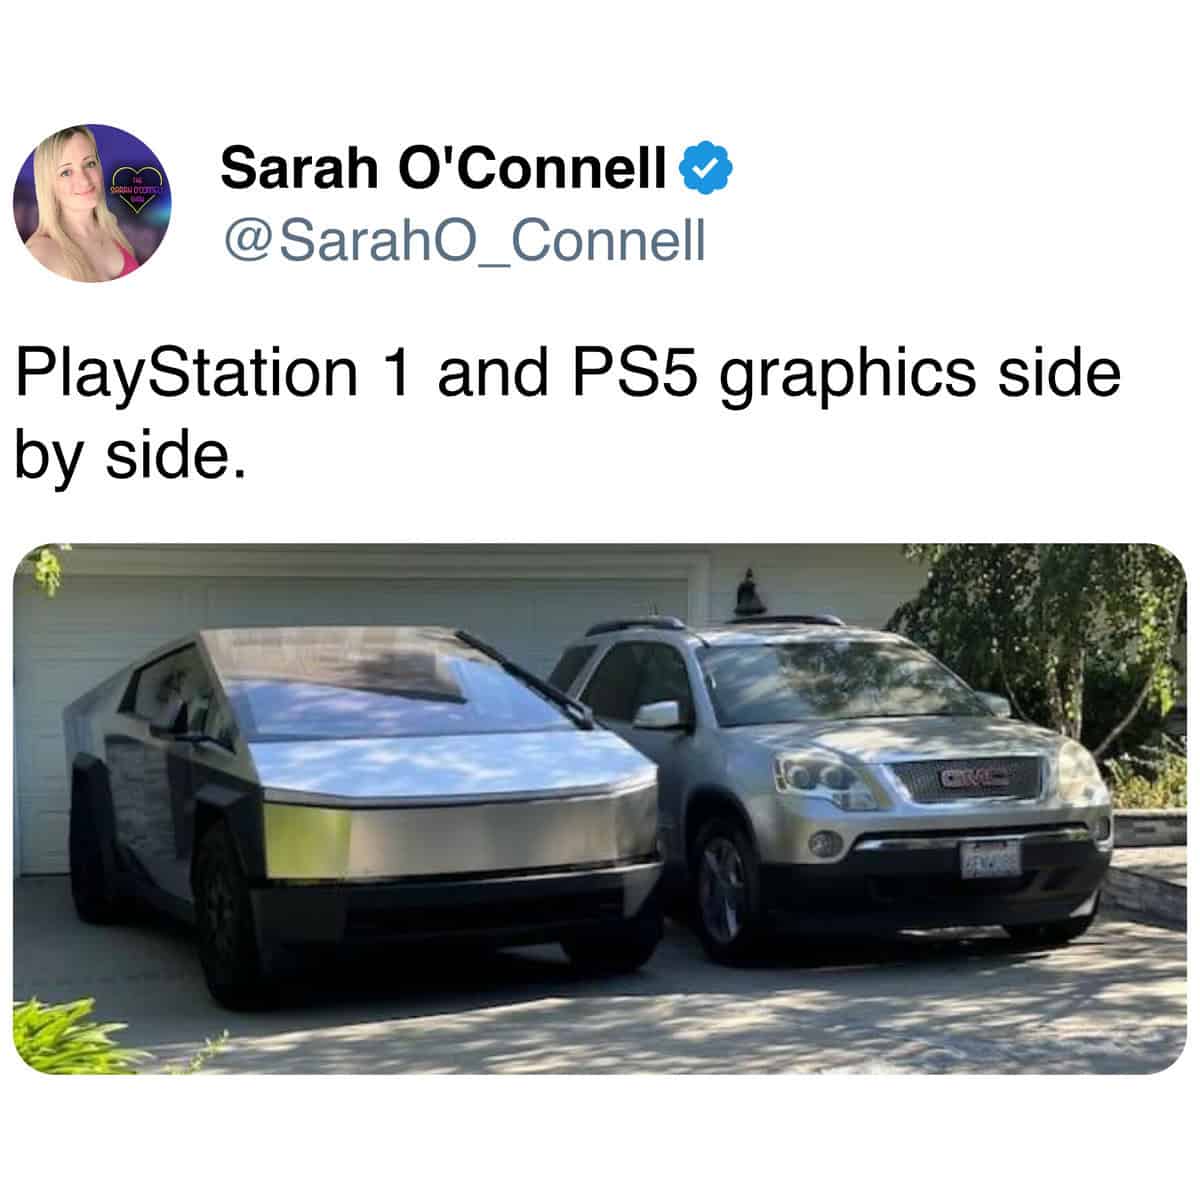 Meme - Sarah O'Connell Sparn Dootc PlayStation 1 and PS5 graphics side by side. Crivl